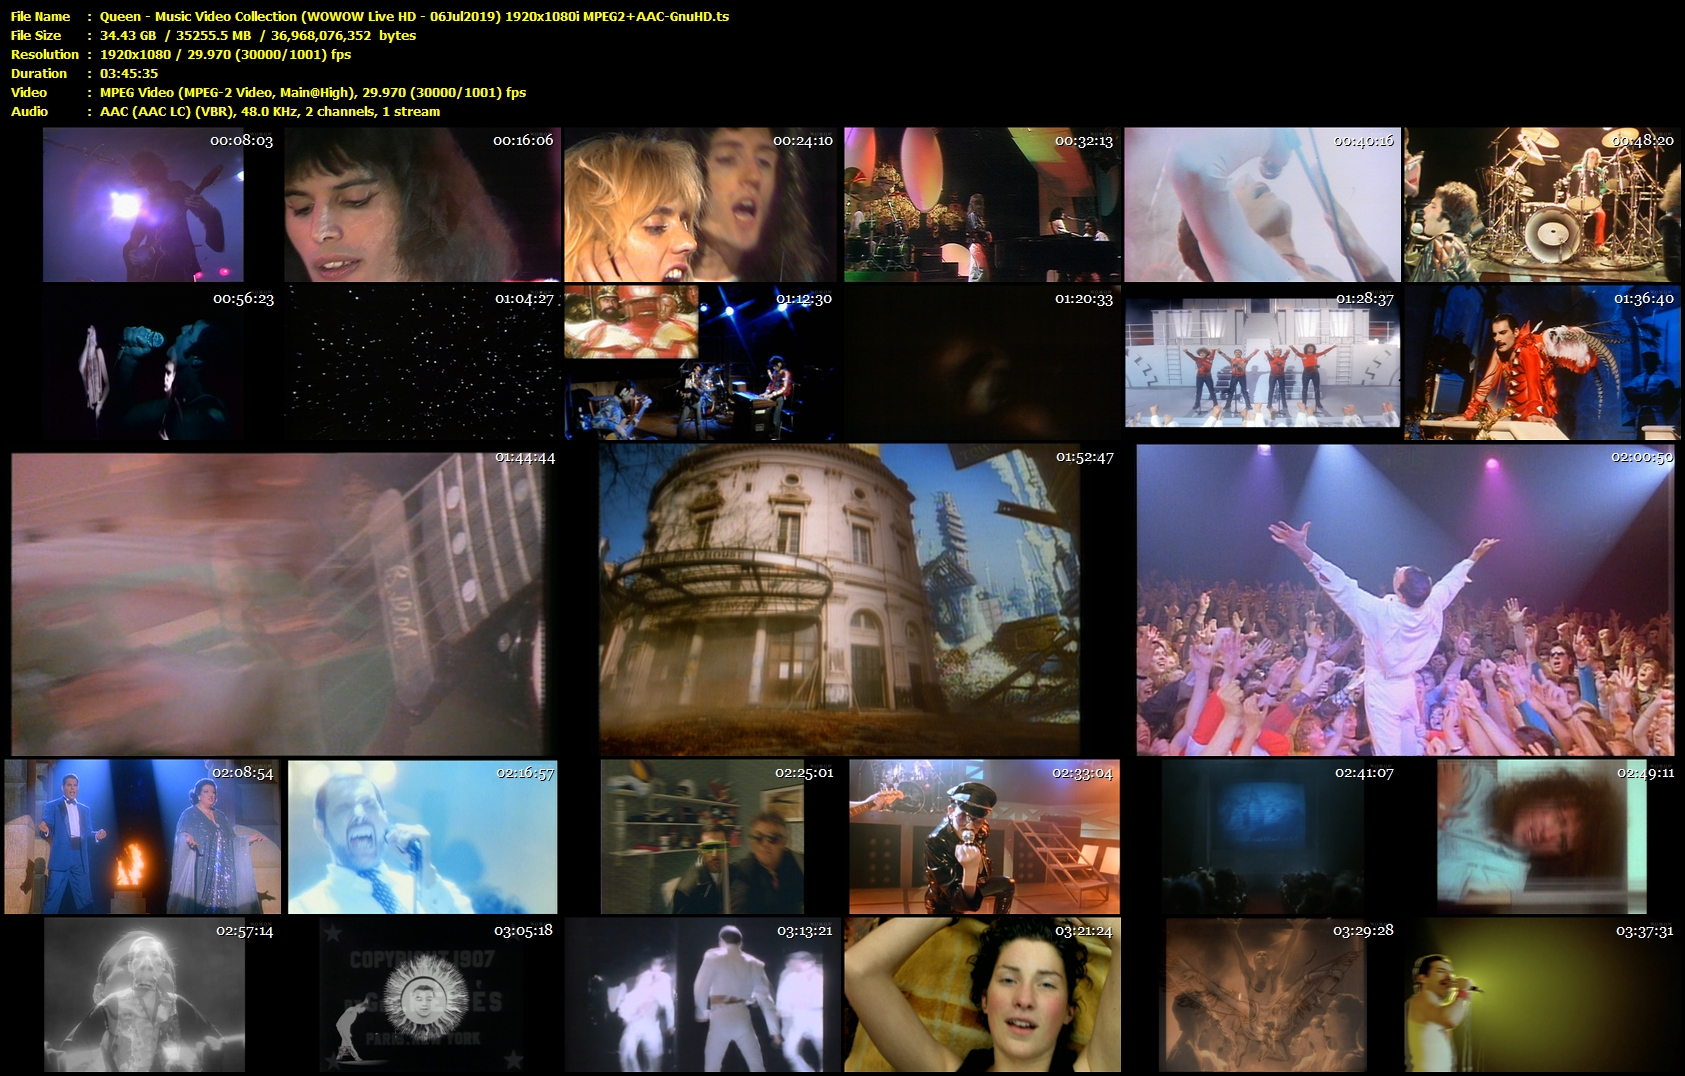 Queen Music Video Collection Wowow Live Hd 06jul19 19x1080i Mpeg2 c Gnuhd Hqcelebcorner